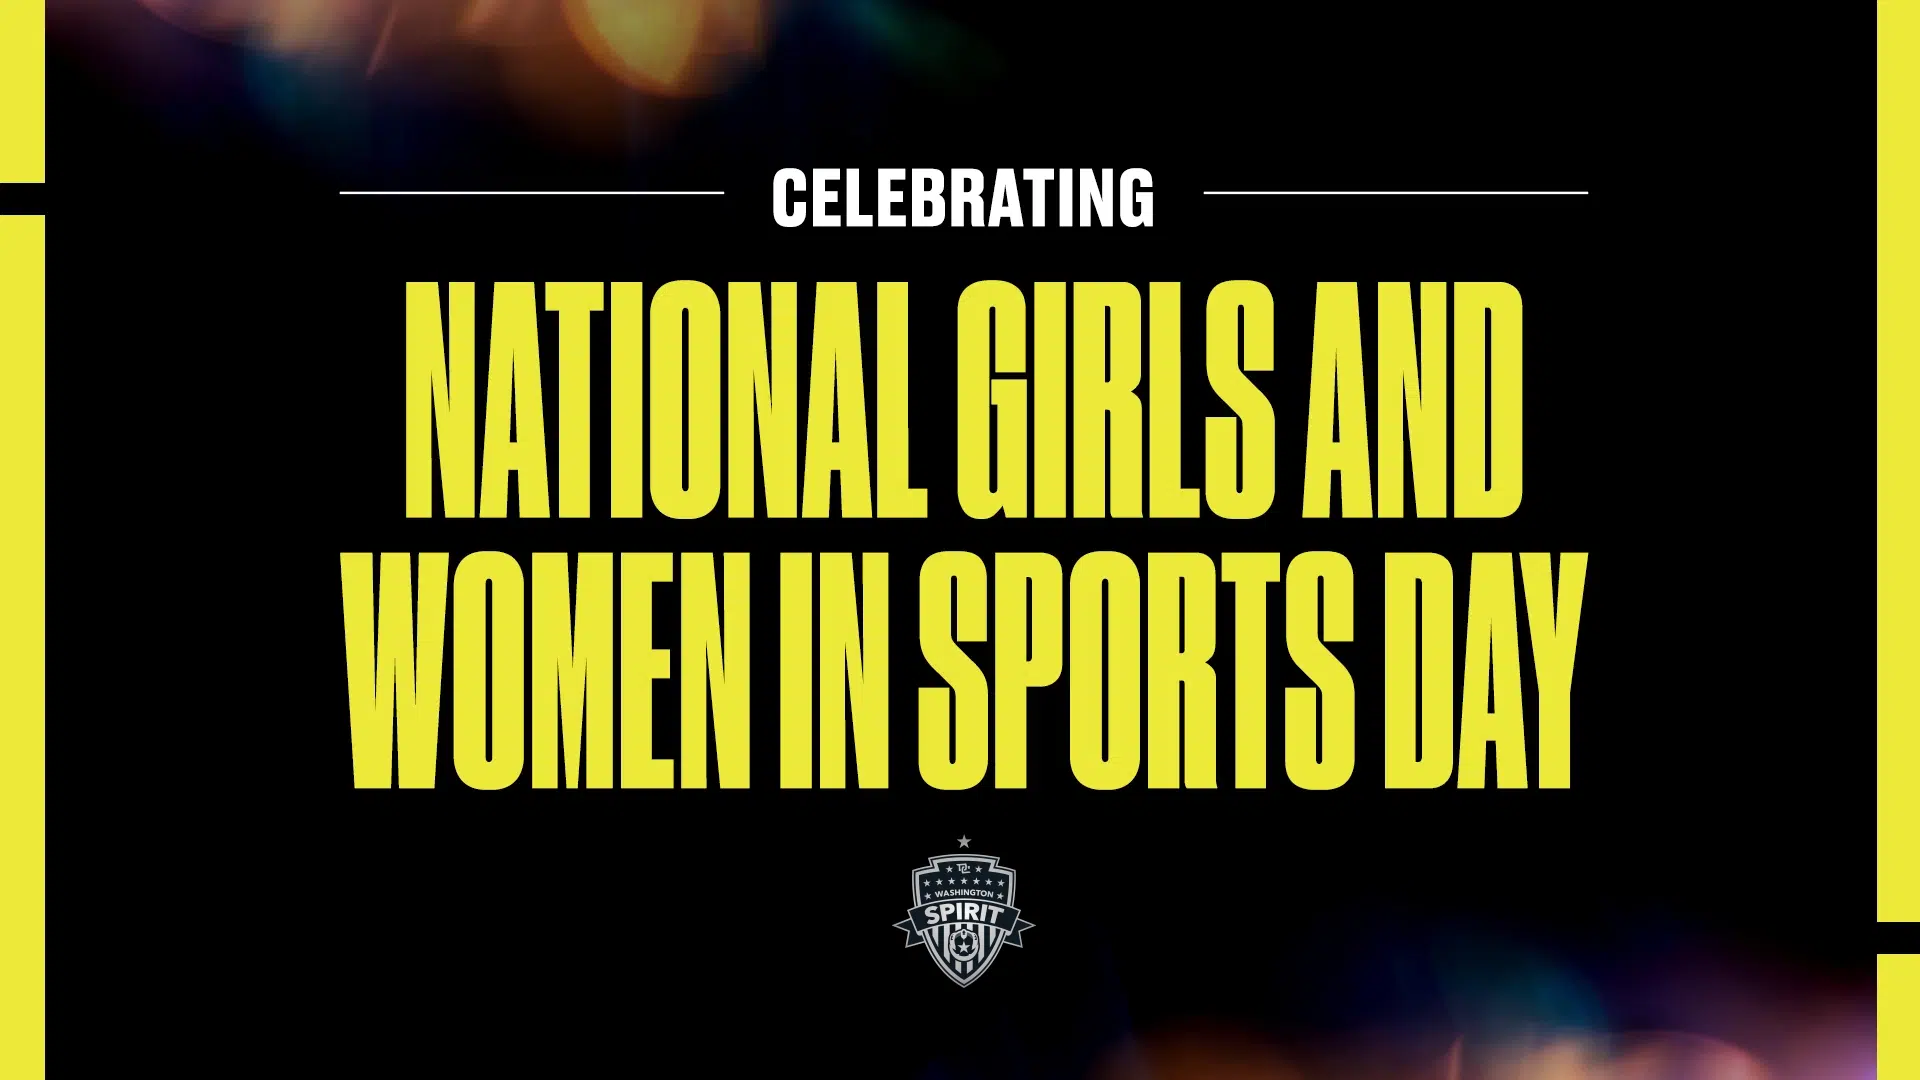 Celebrating National Girls and Women in Sports Day at the Spirit Featured Image